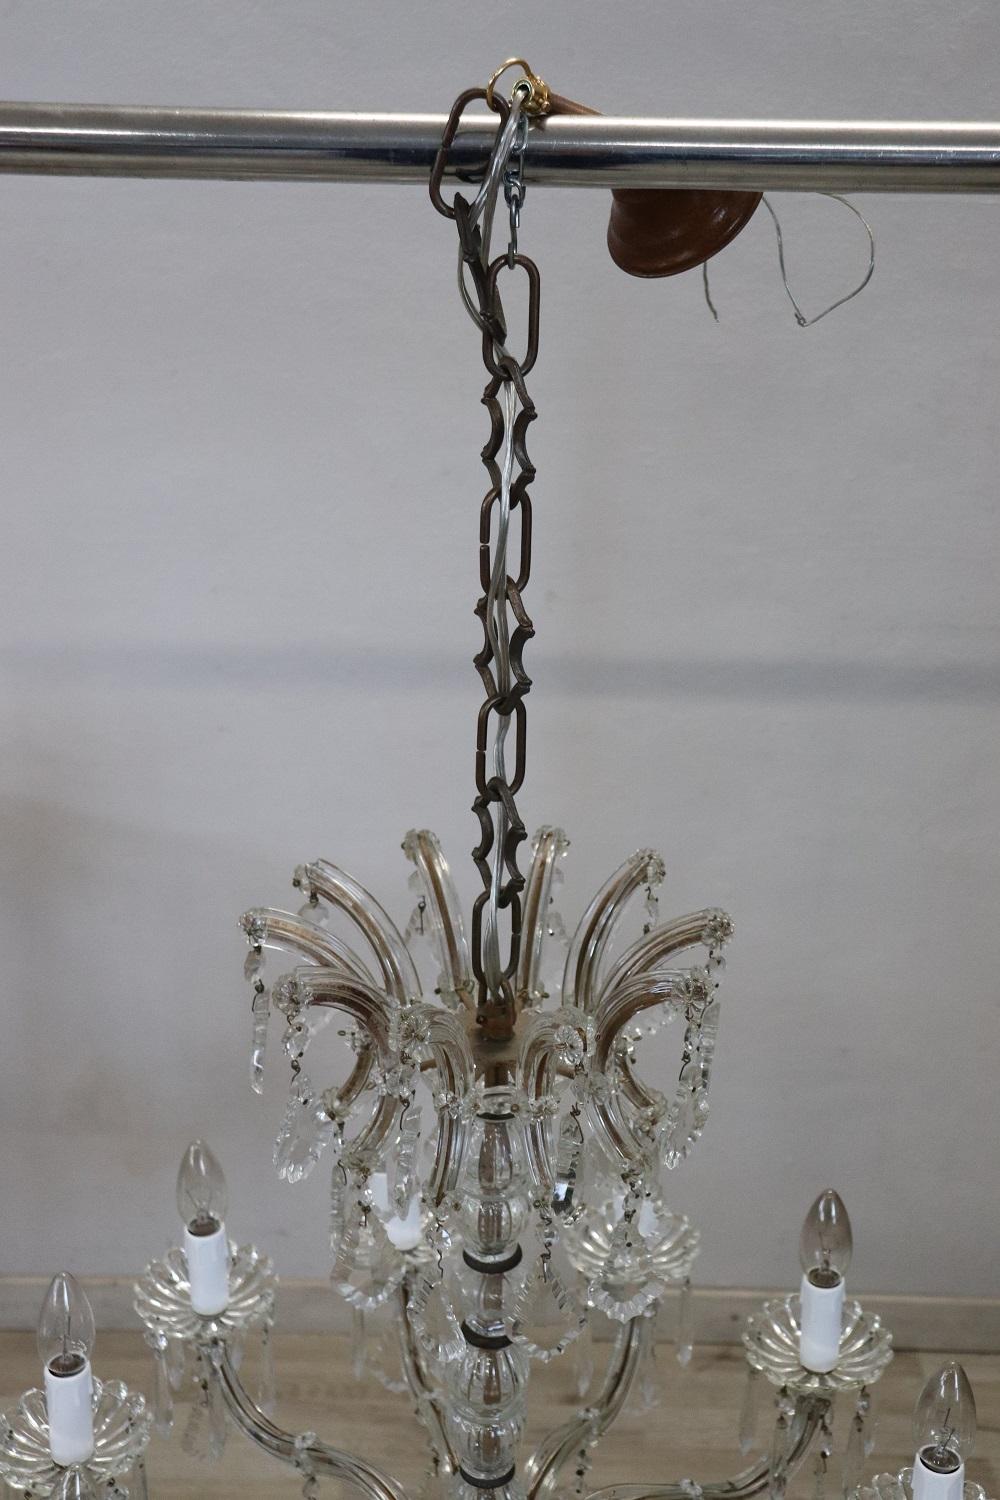 19th Century Italian Bronze and Crystals Antique Chandelier 1